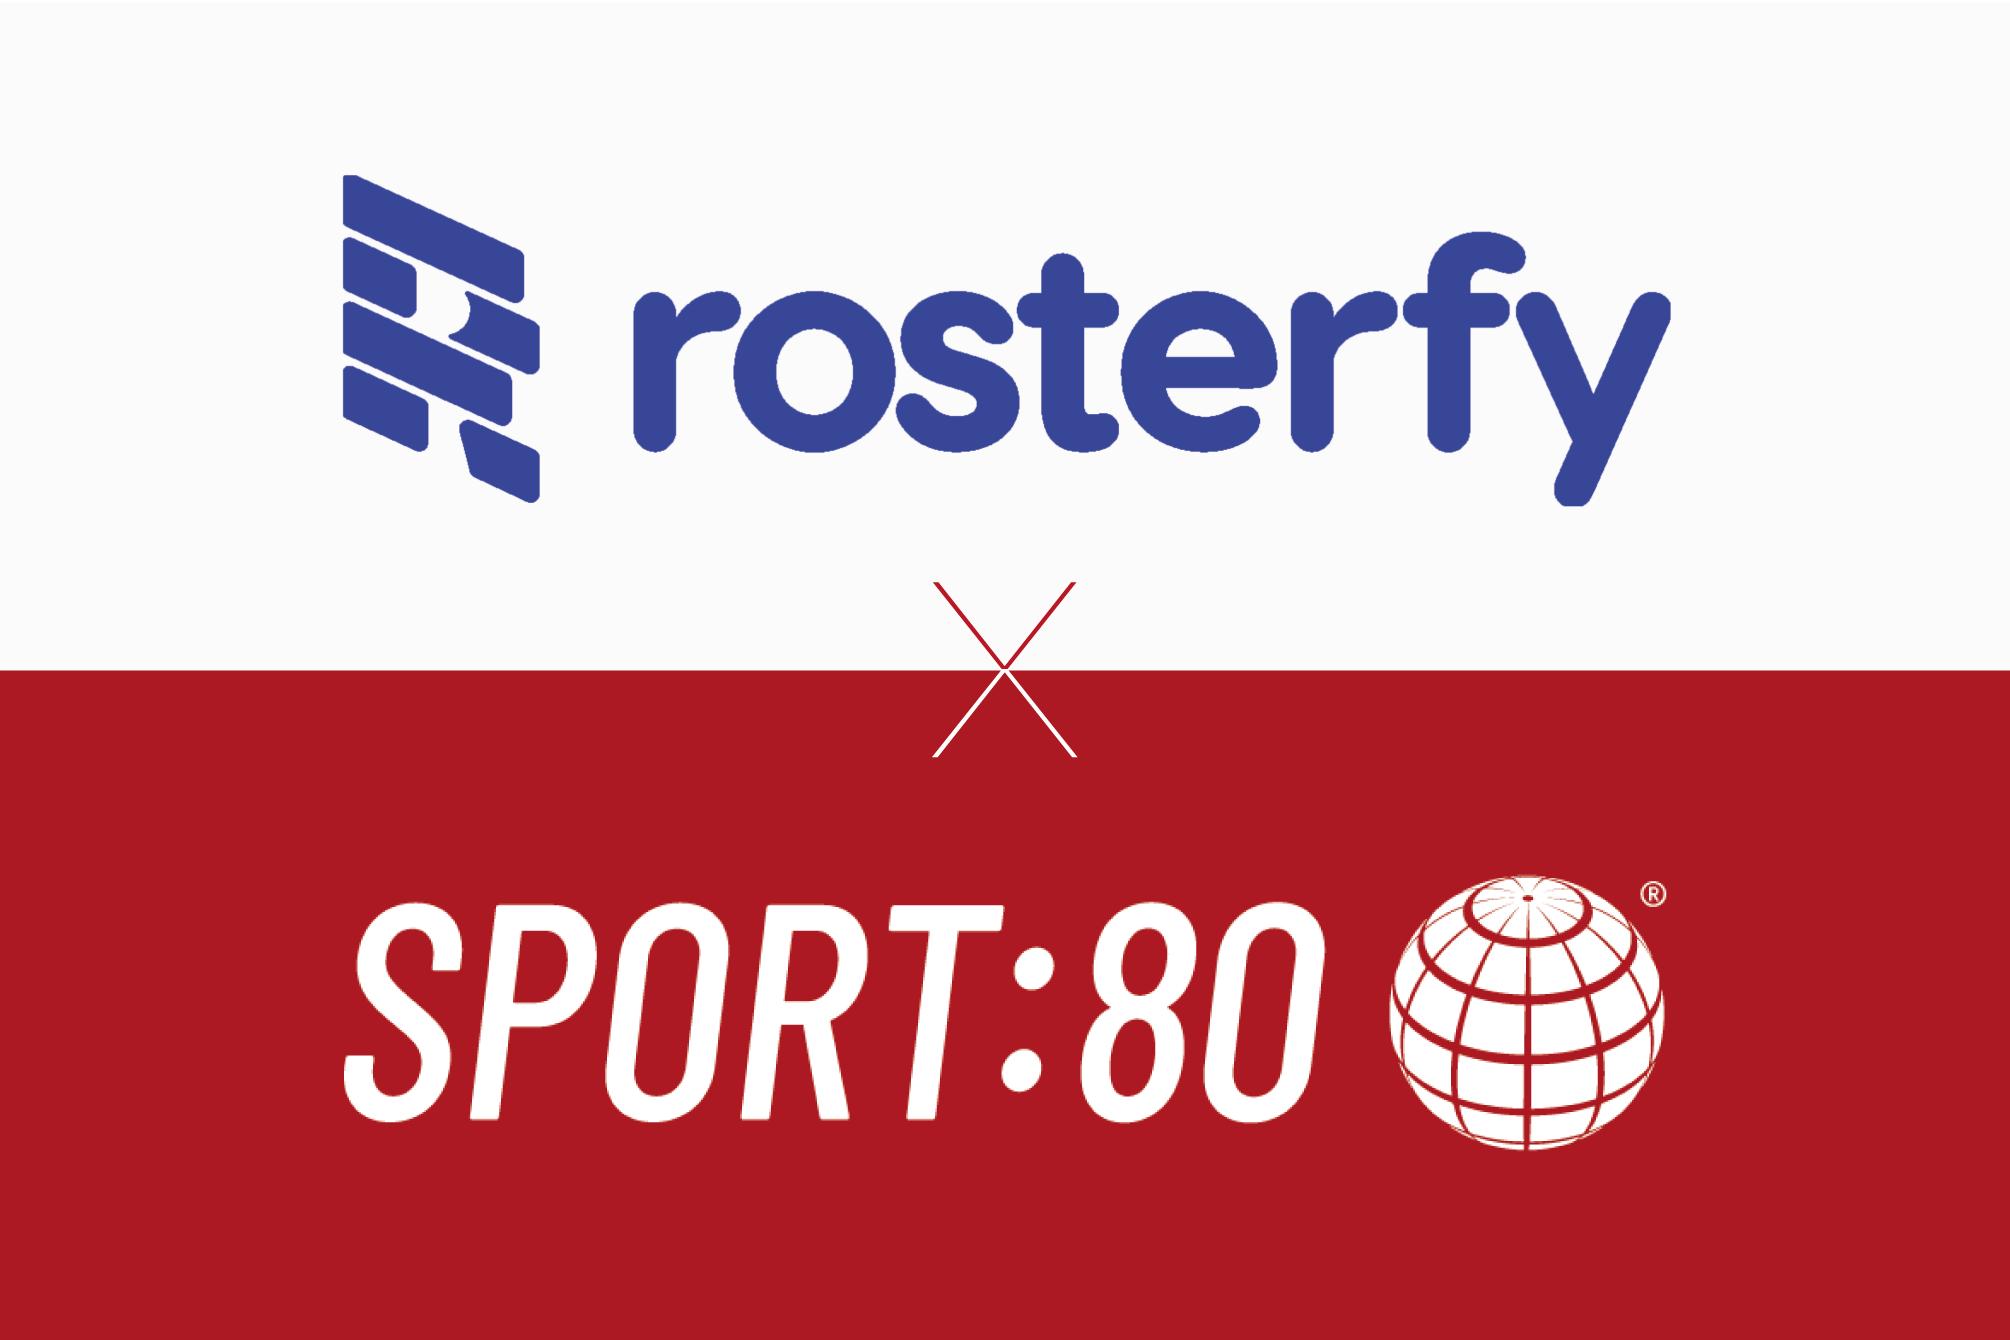 How NGBs are making workforce management easier through Sport:80 and Rosterfy partnership